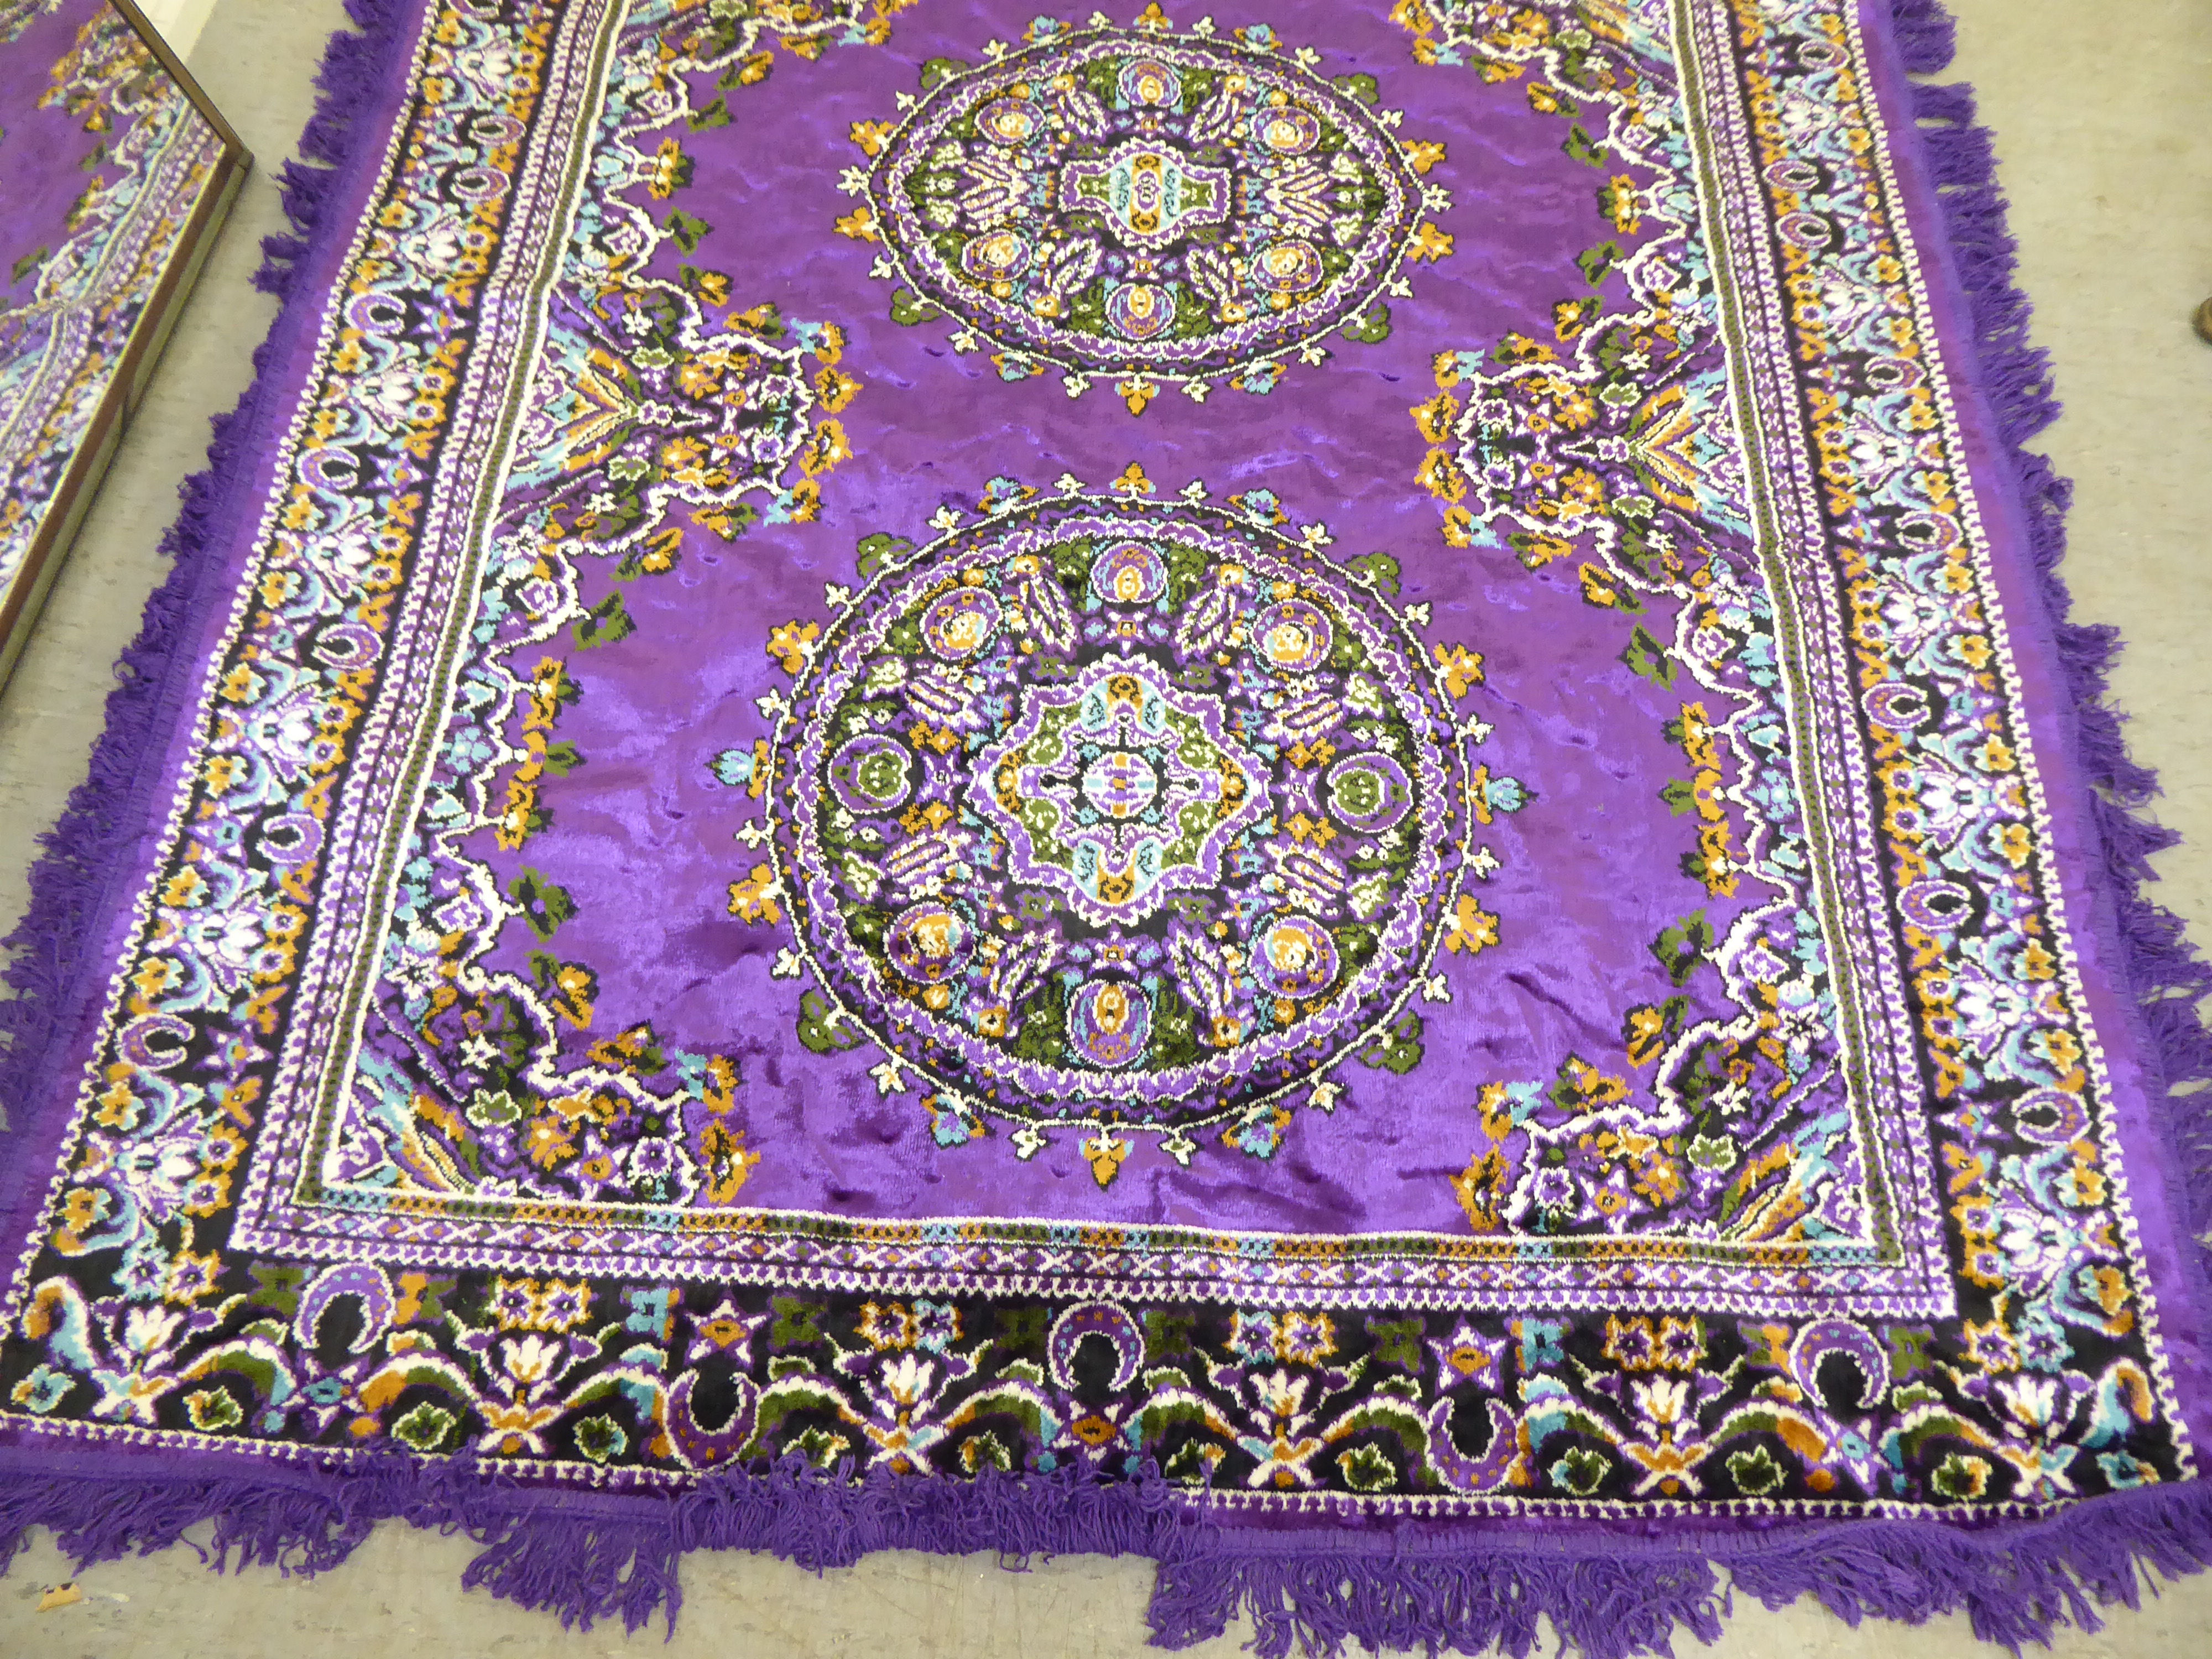 A Persian design rug, decorated with floral motifs, on a purple ground  86" x 56" - Image 2 of 4